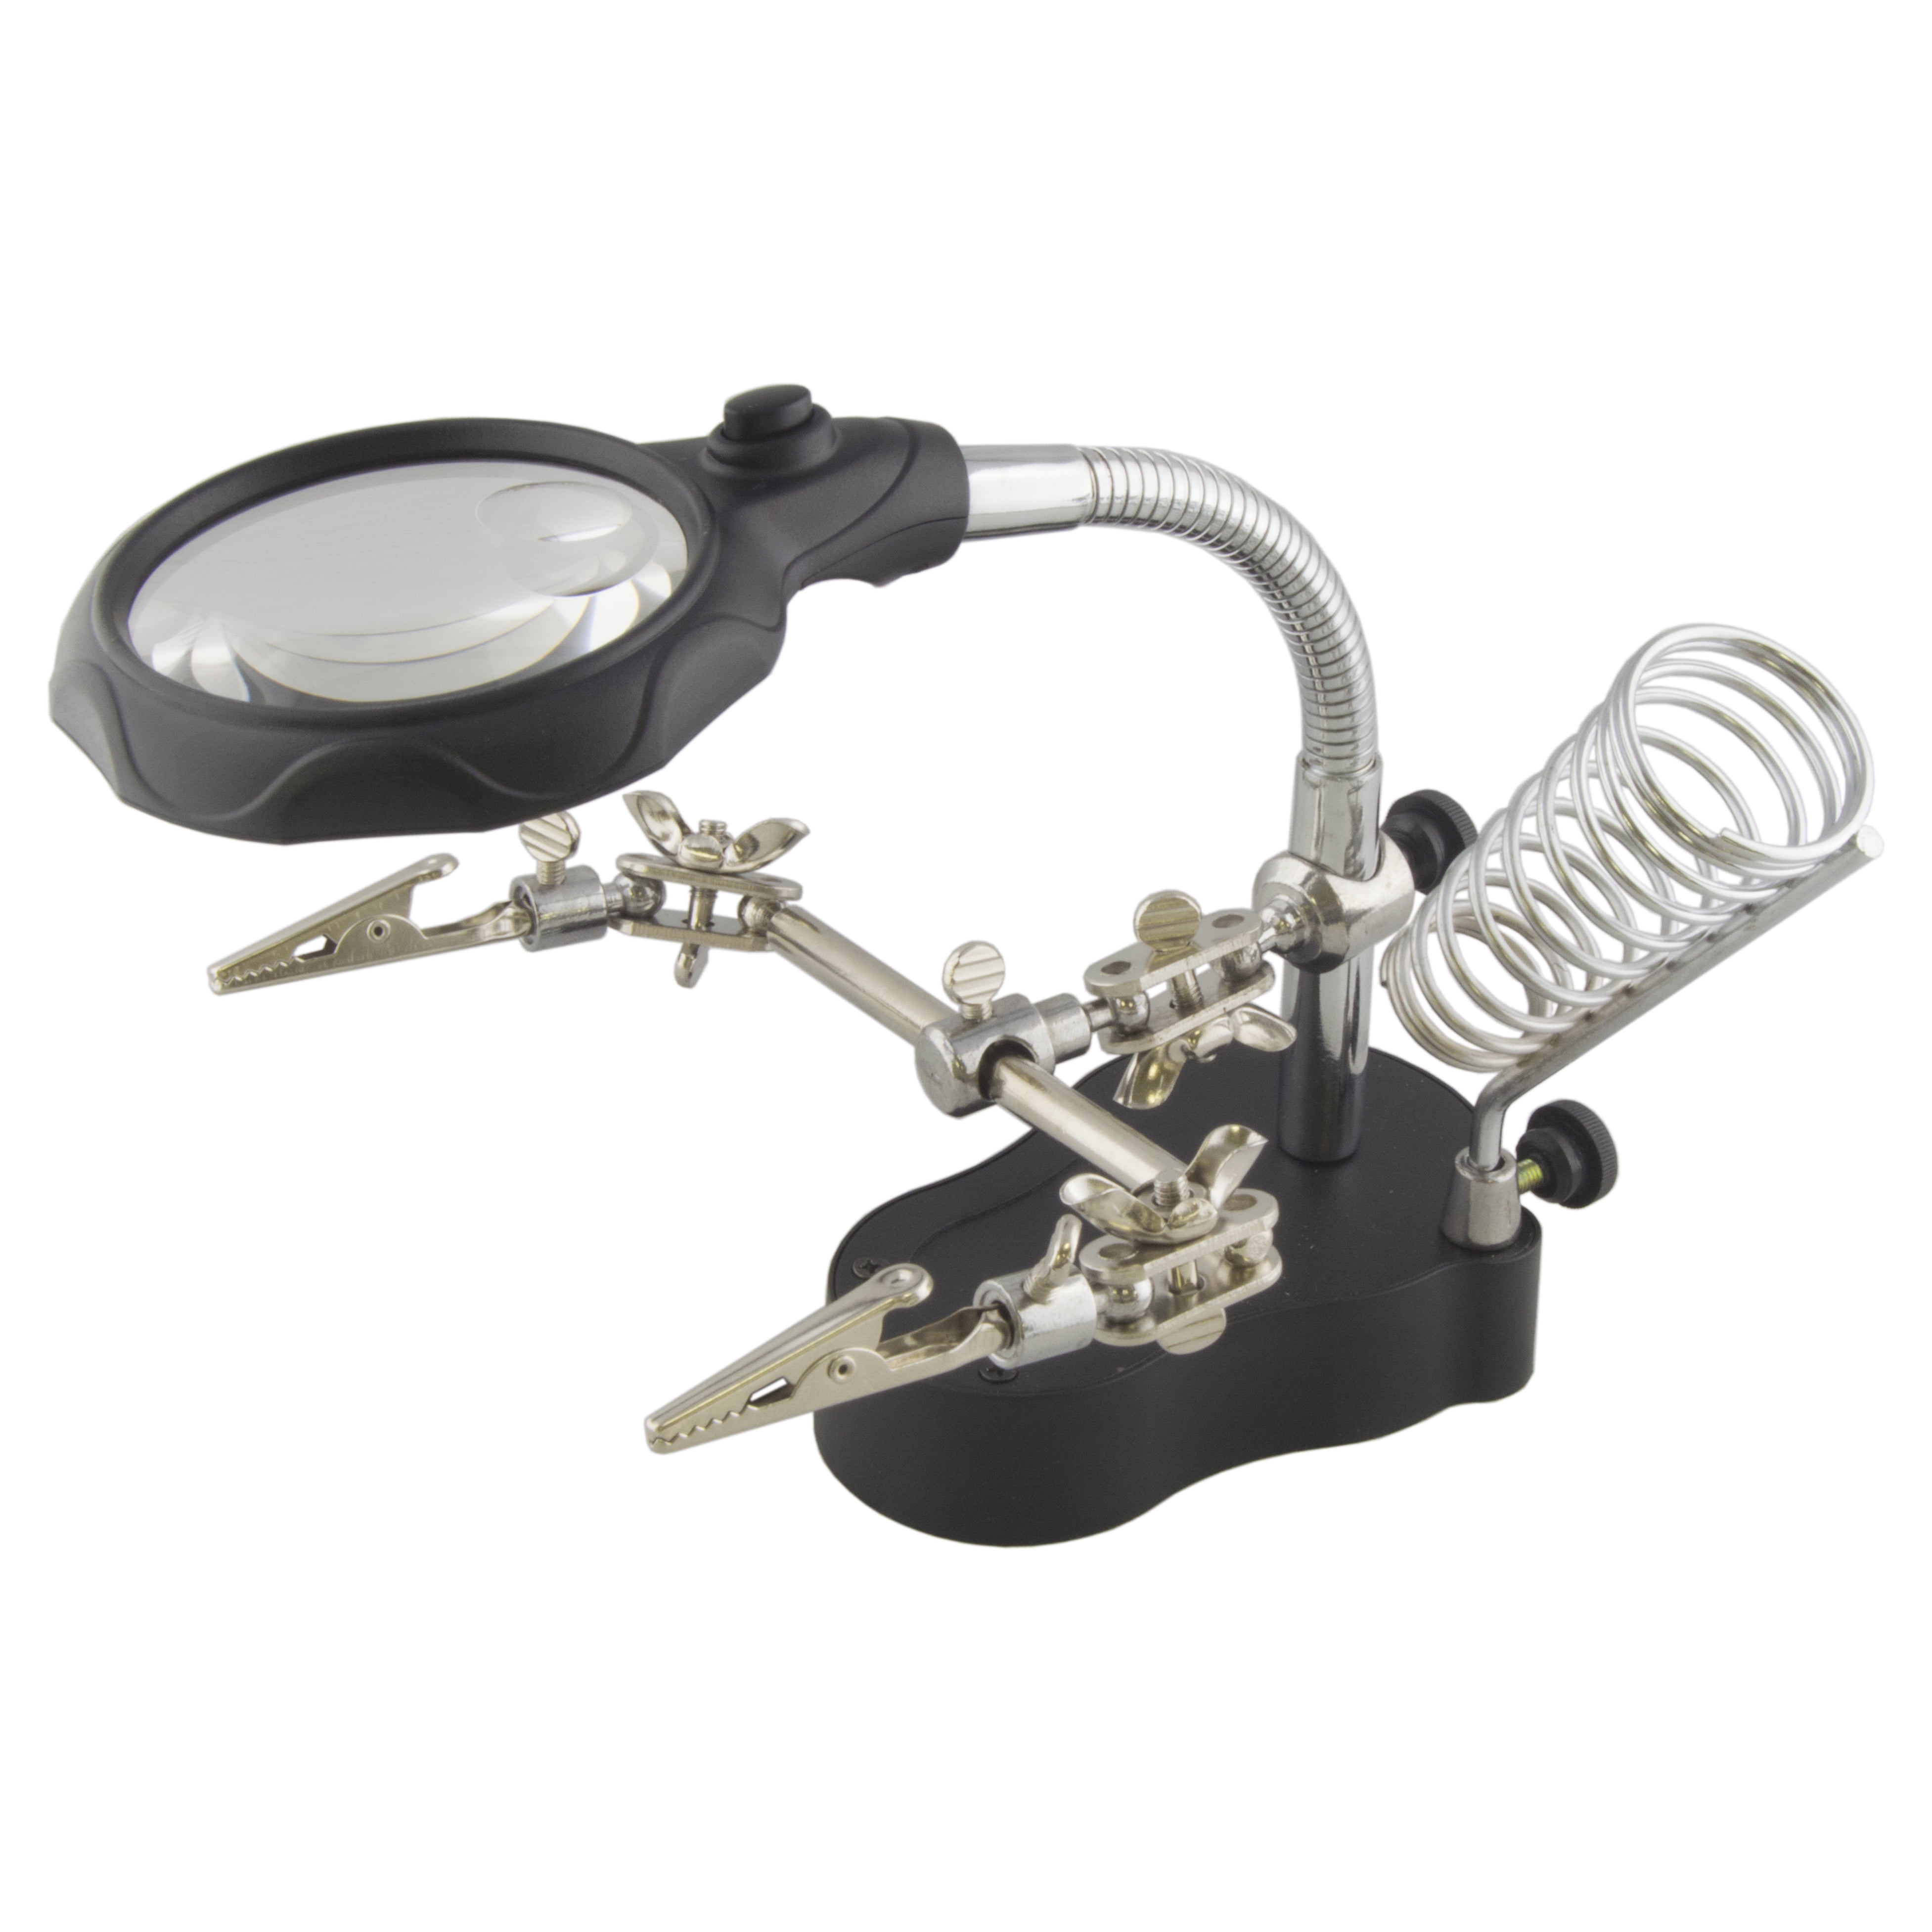 LED Light Soldering Iron Stand Helping Hands Magnifying Glass Magnifier 